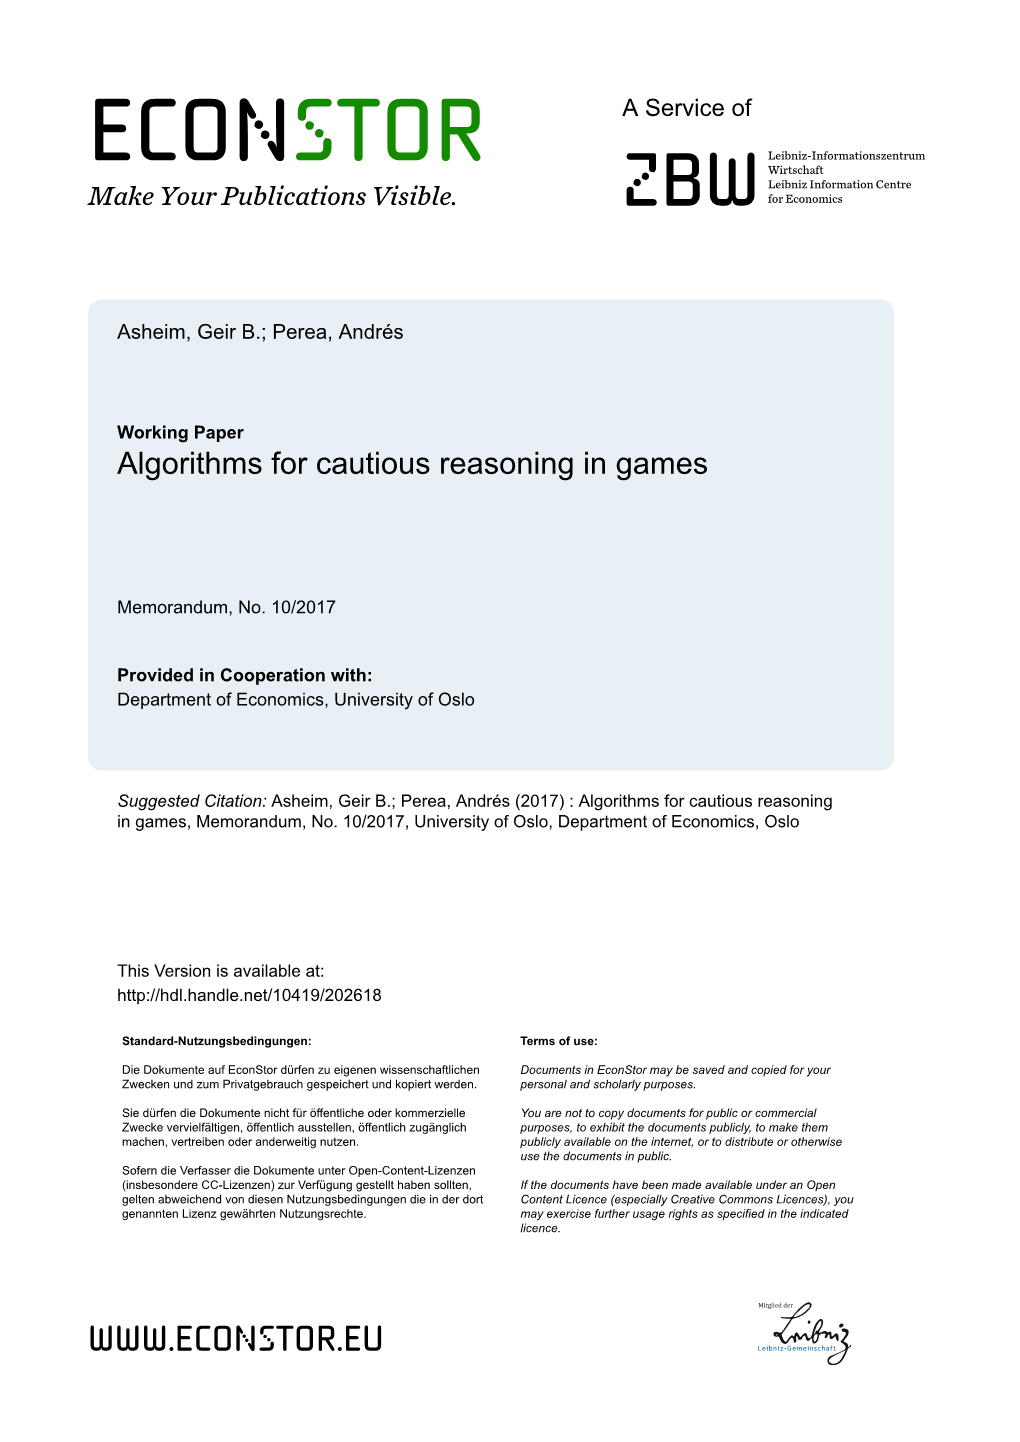 Algorithms for Cautious Reasoning in Games